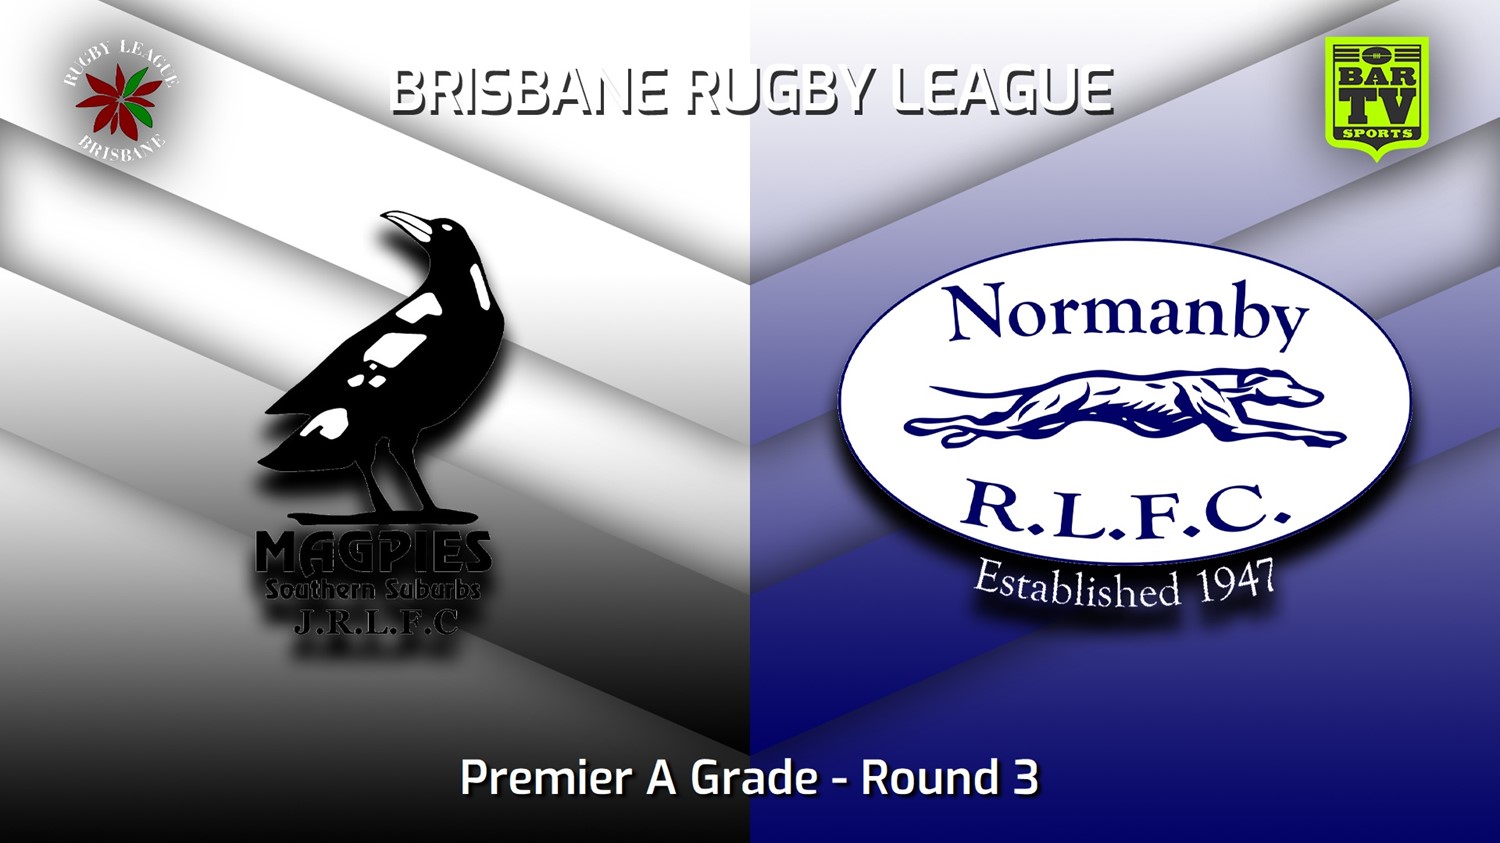 230401-BRL Round 3 - Premier A Grade - Southern Suburbs Magpies v Normanby Hounds Slate Image